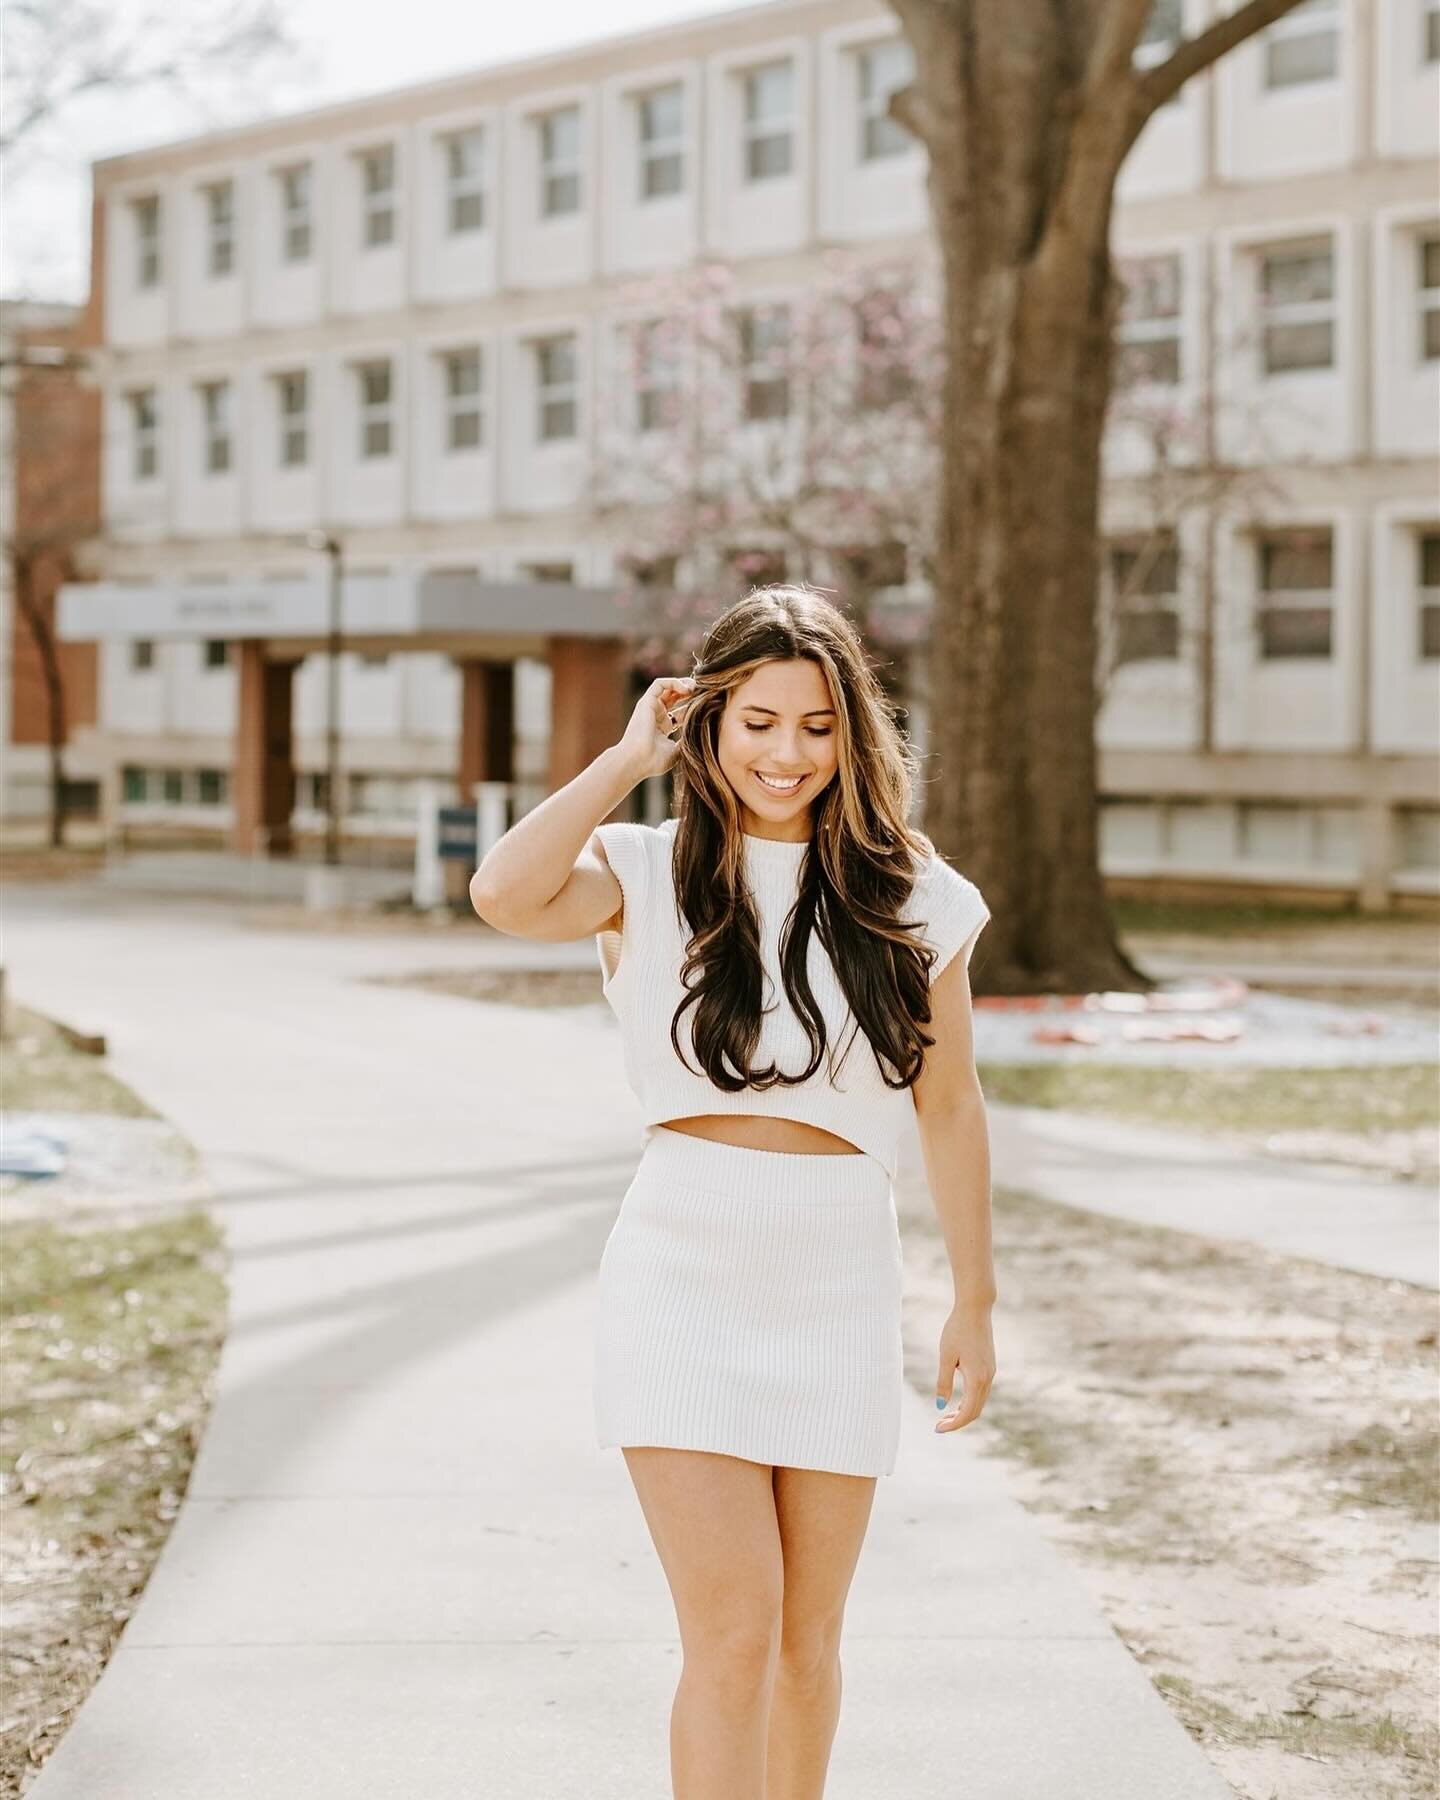 Cheers to a proud moment for my amazing client, celebrating their graduation from the University of Memphis! #College #UofM #Memphis #Tennessee #GraduationPhotography #OOTD